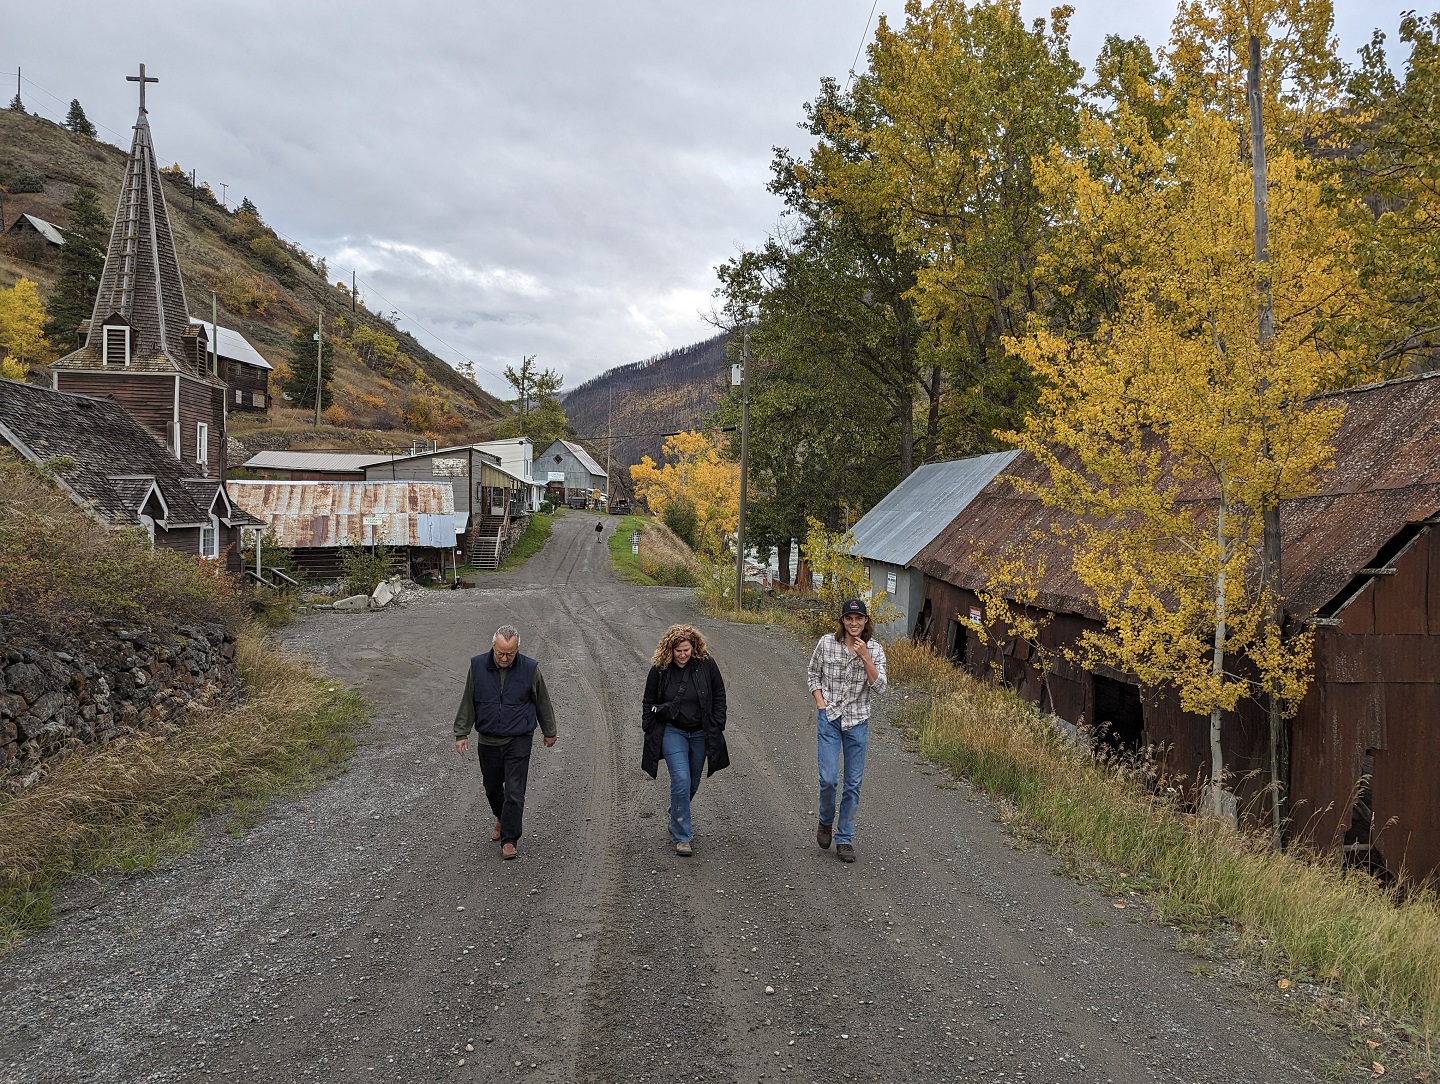 Three people walk on a gravel road flanked by fall foliage.